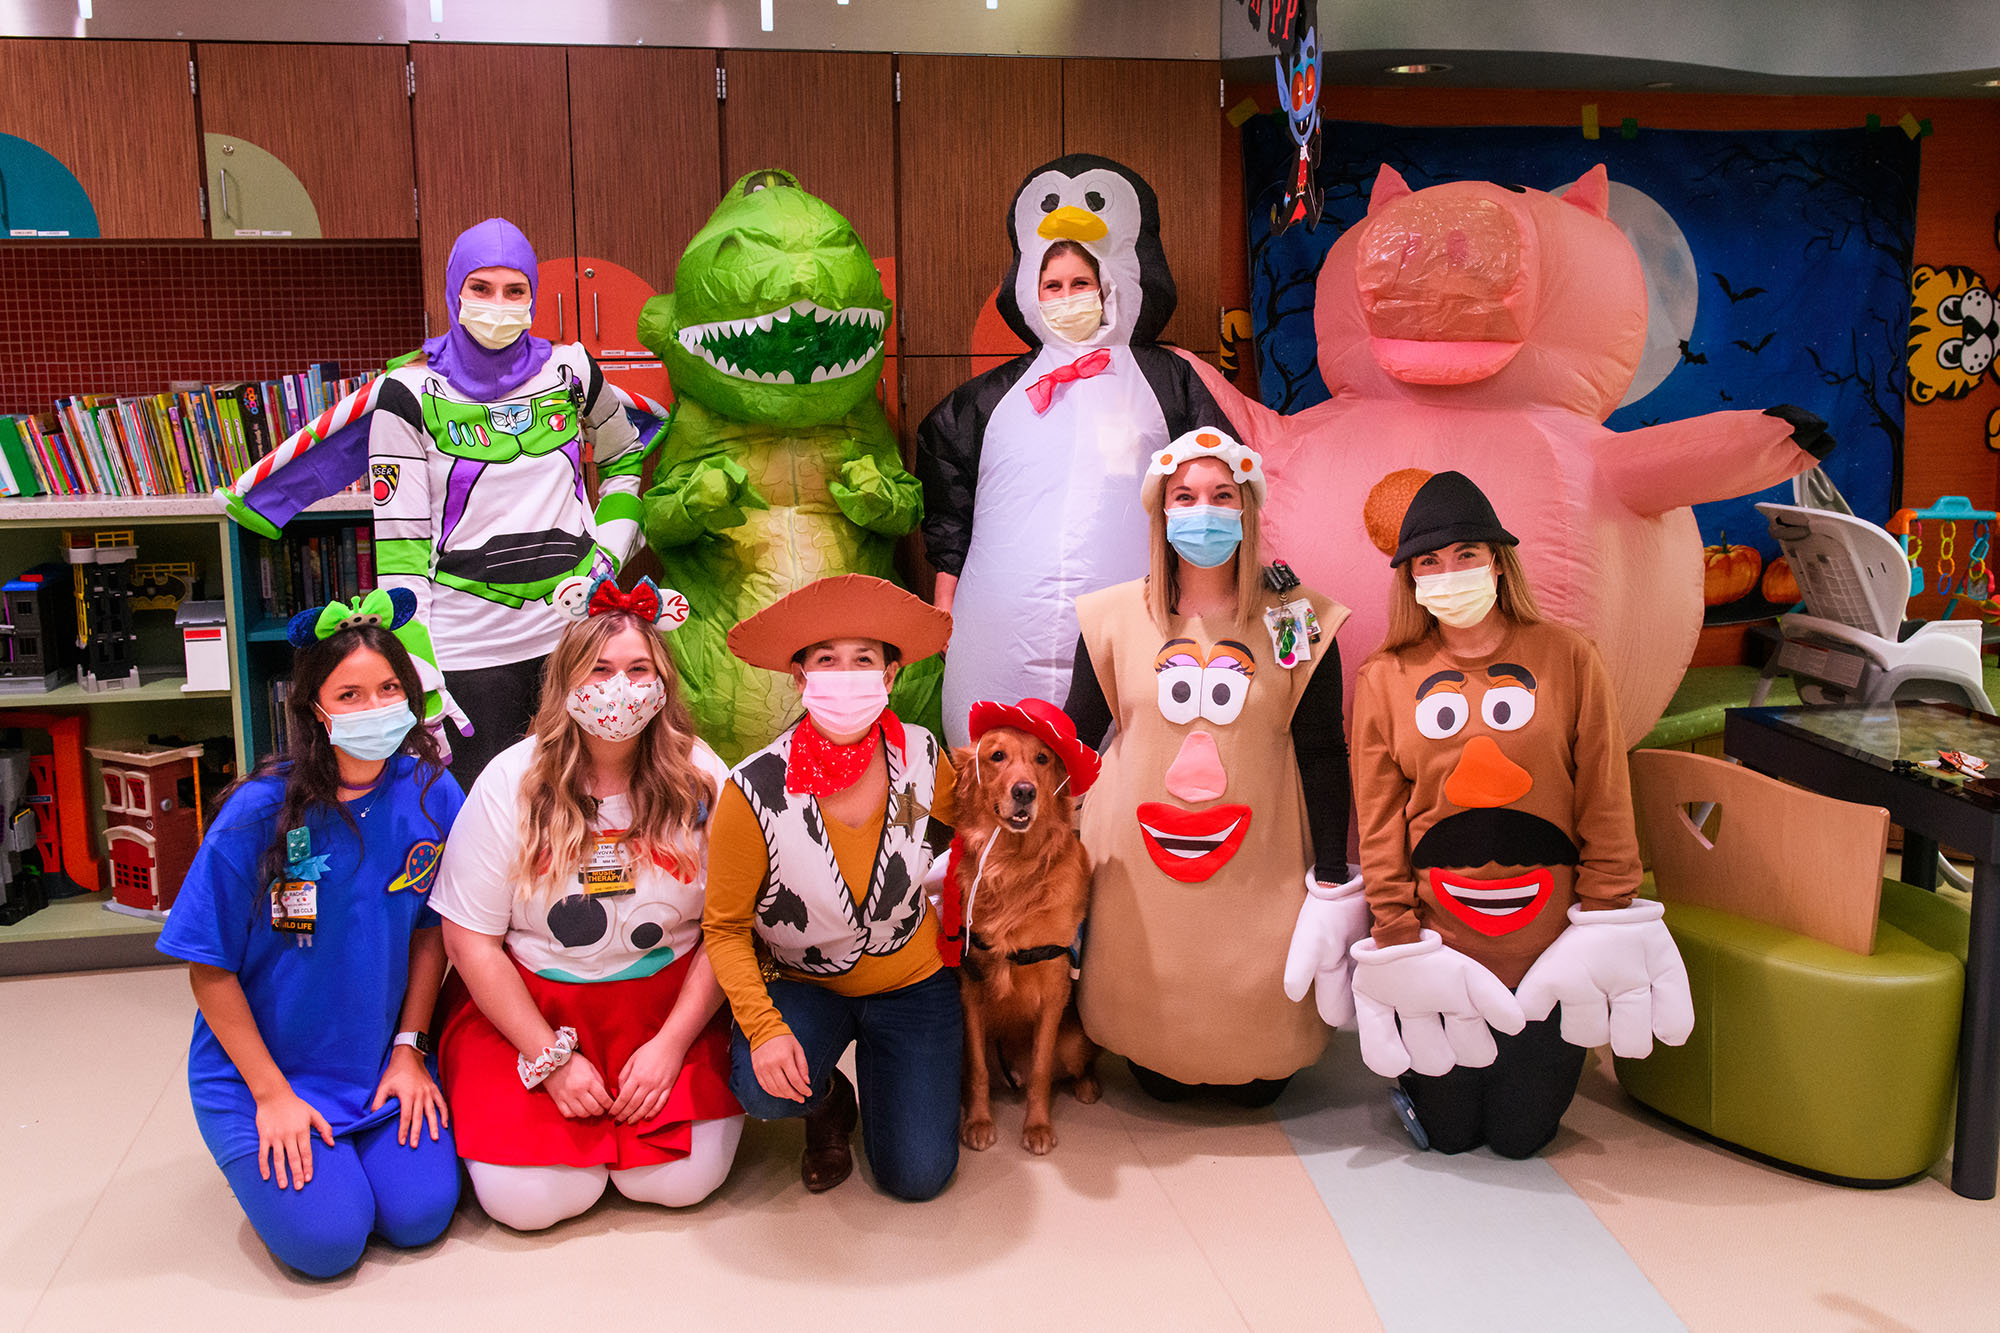 a group photo of employees dressed as toy story characters. the therapy dog is in the center, dressed as jessie